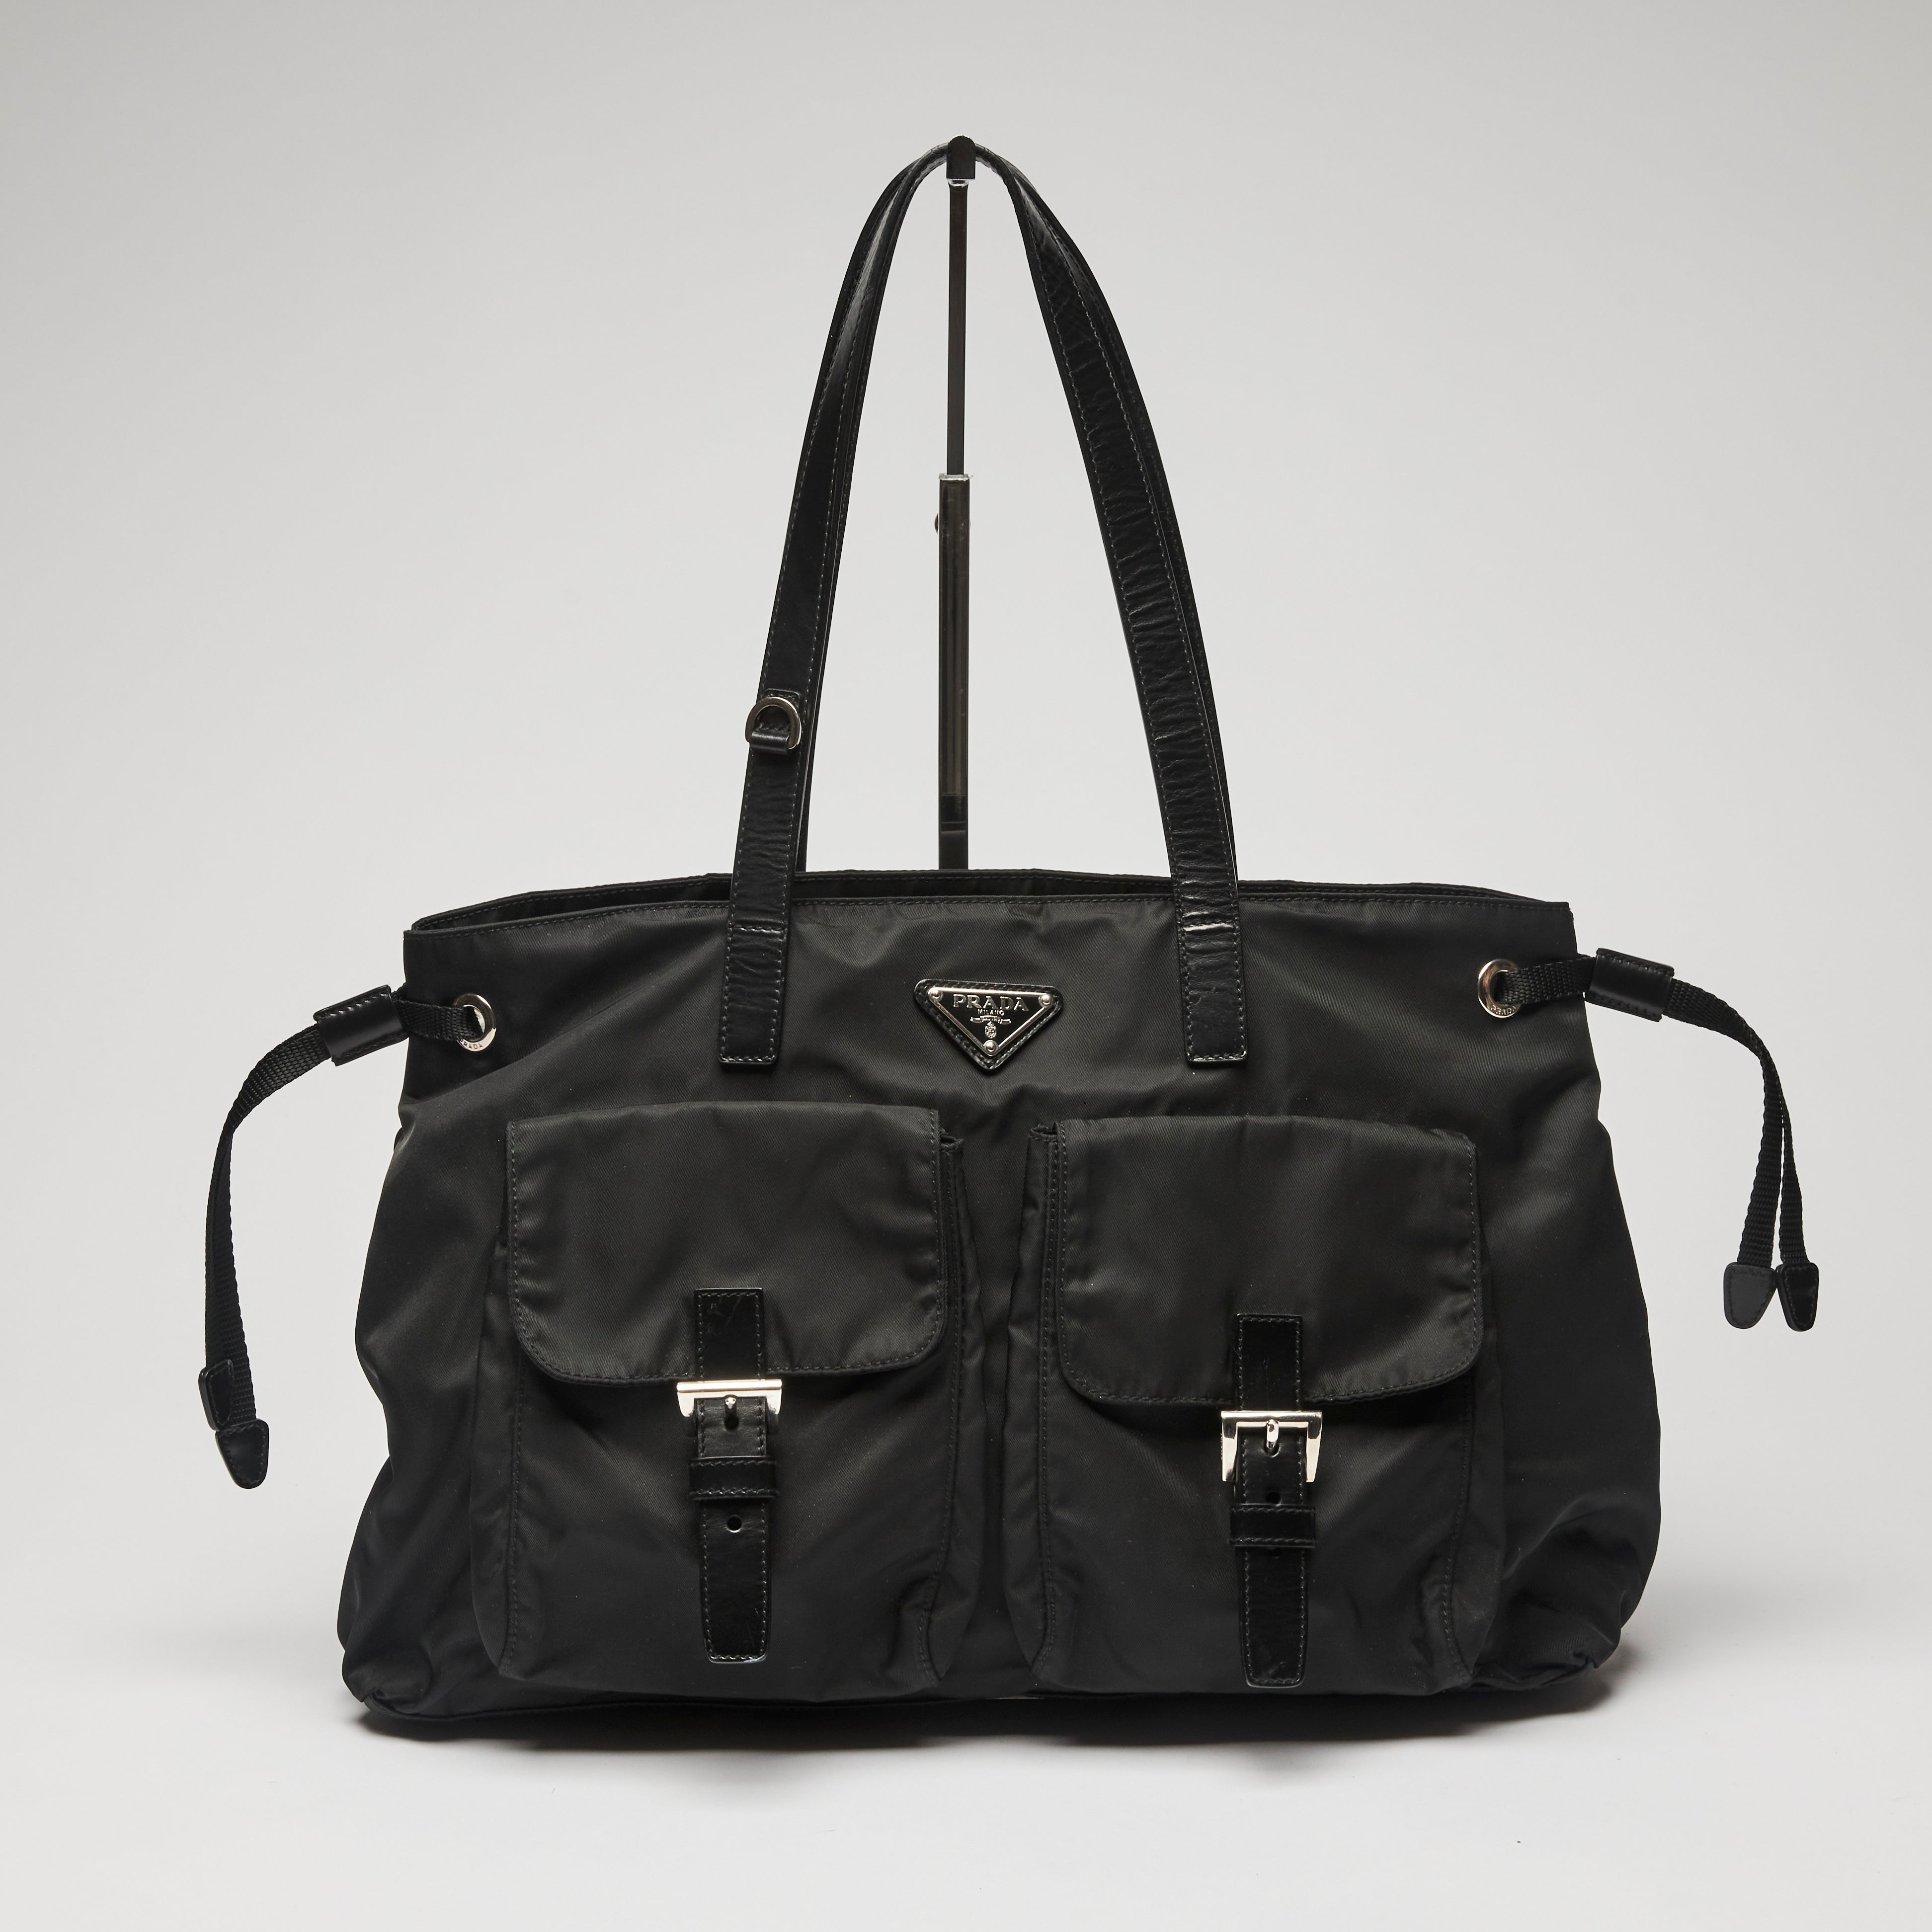 Prada Two-way tote bag with 2 straps